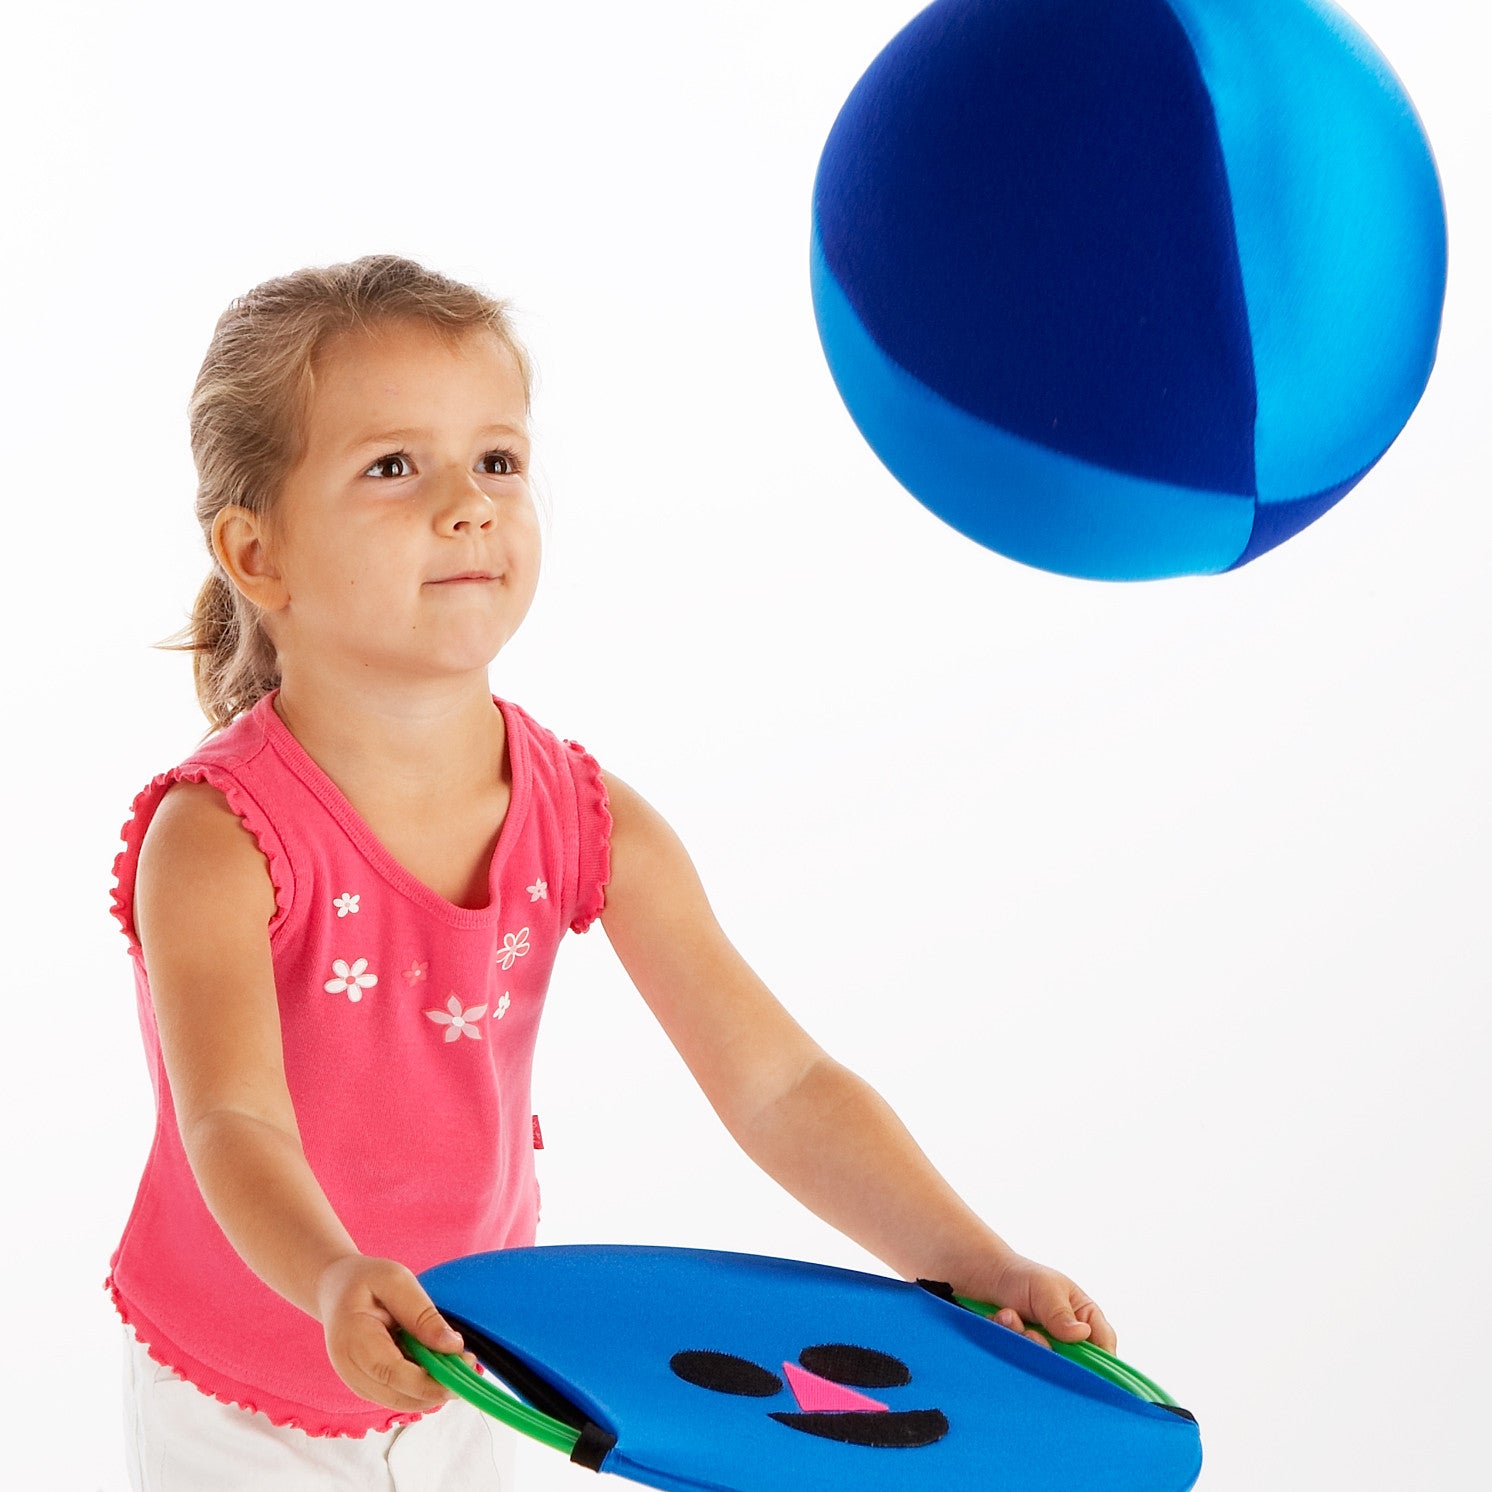 Early Years Coaching Aid. Practise hand-eye coordination with Zsig's Easy Catch range. Happy Face and Balloon Ball.